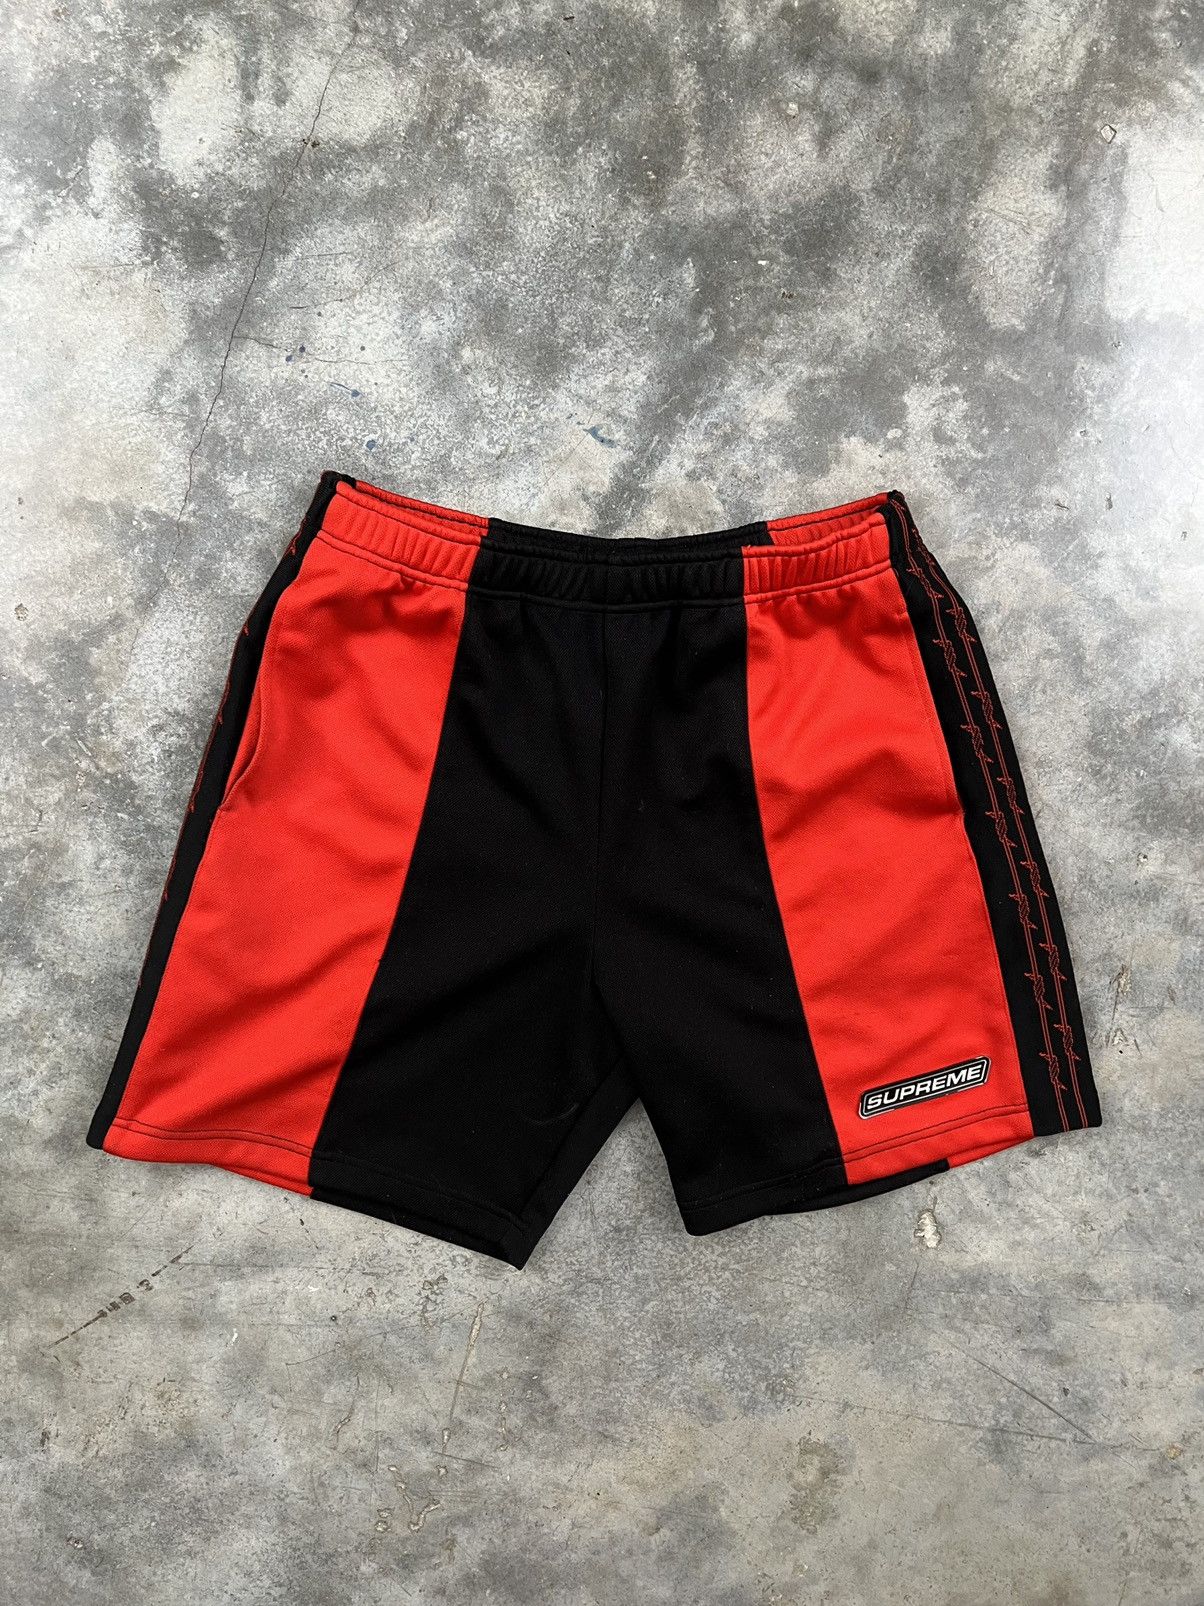 Supreme Supreme Barbed Wire Basketball Shorts Black + Red Small ...